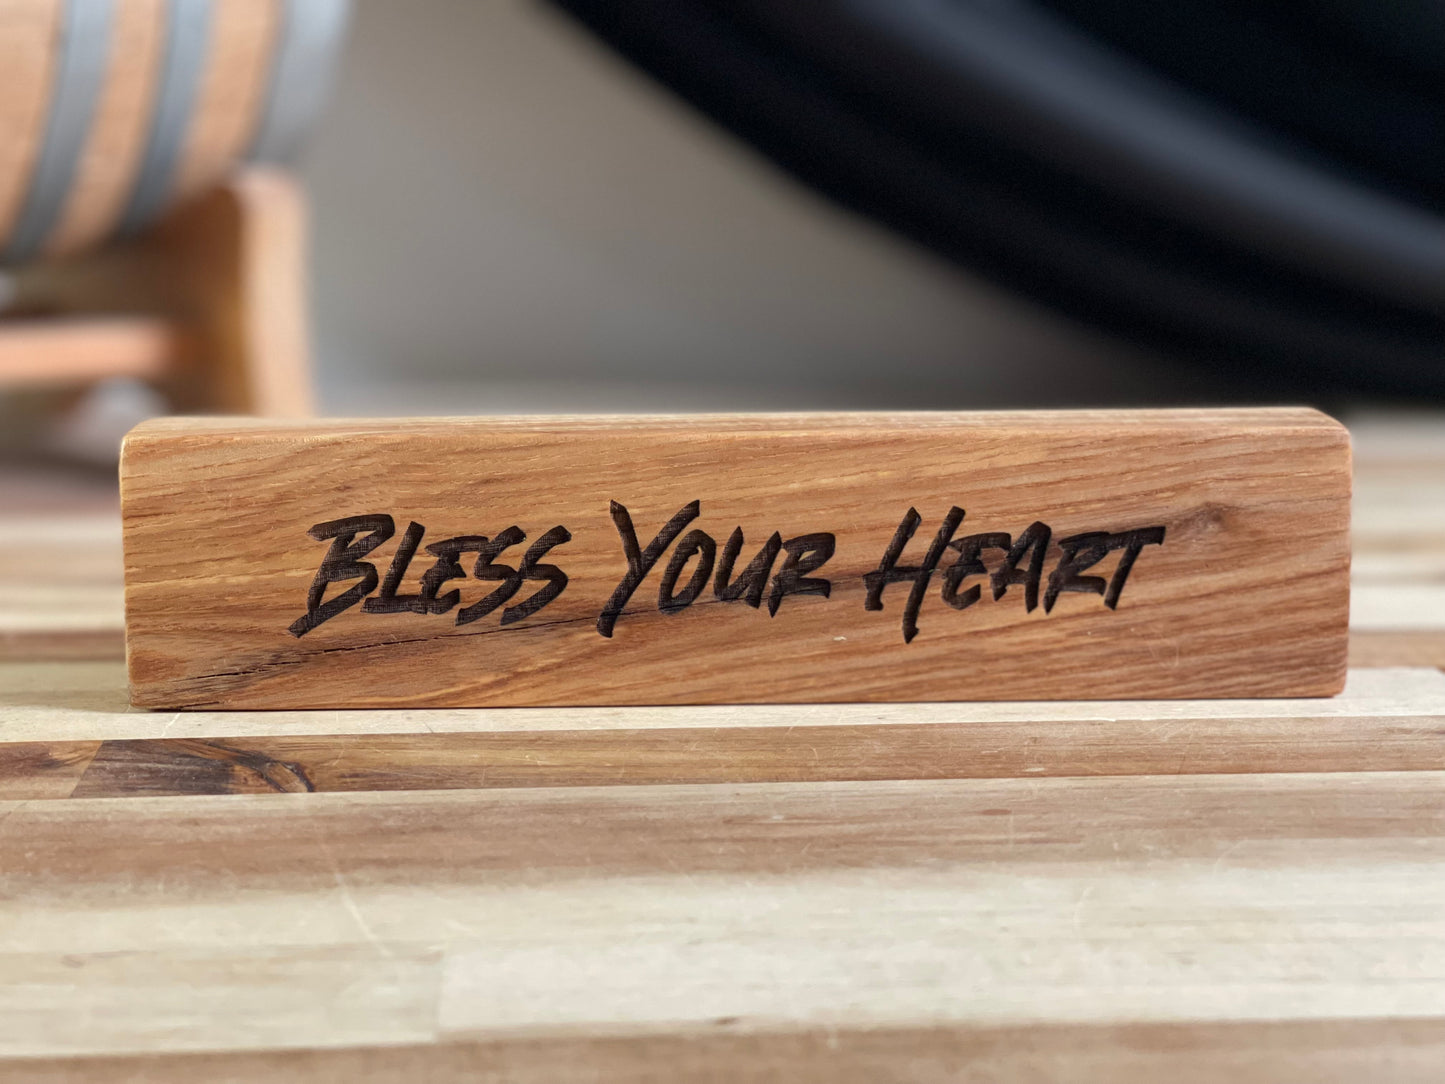 Southern Sayings: Bless Your Heart